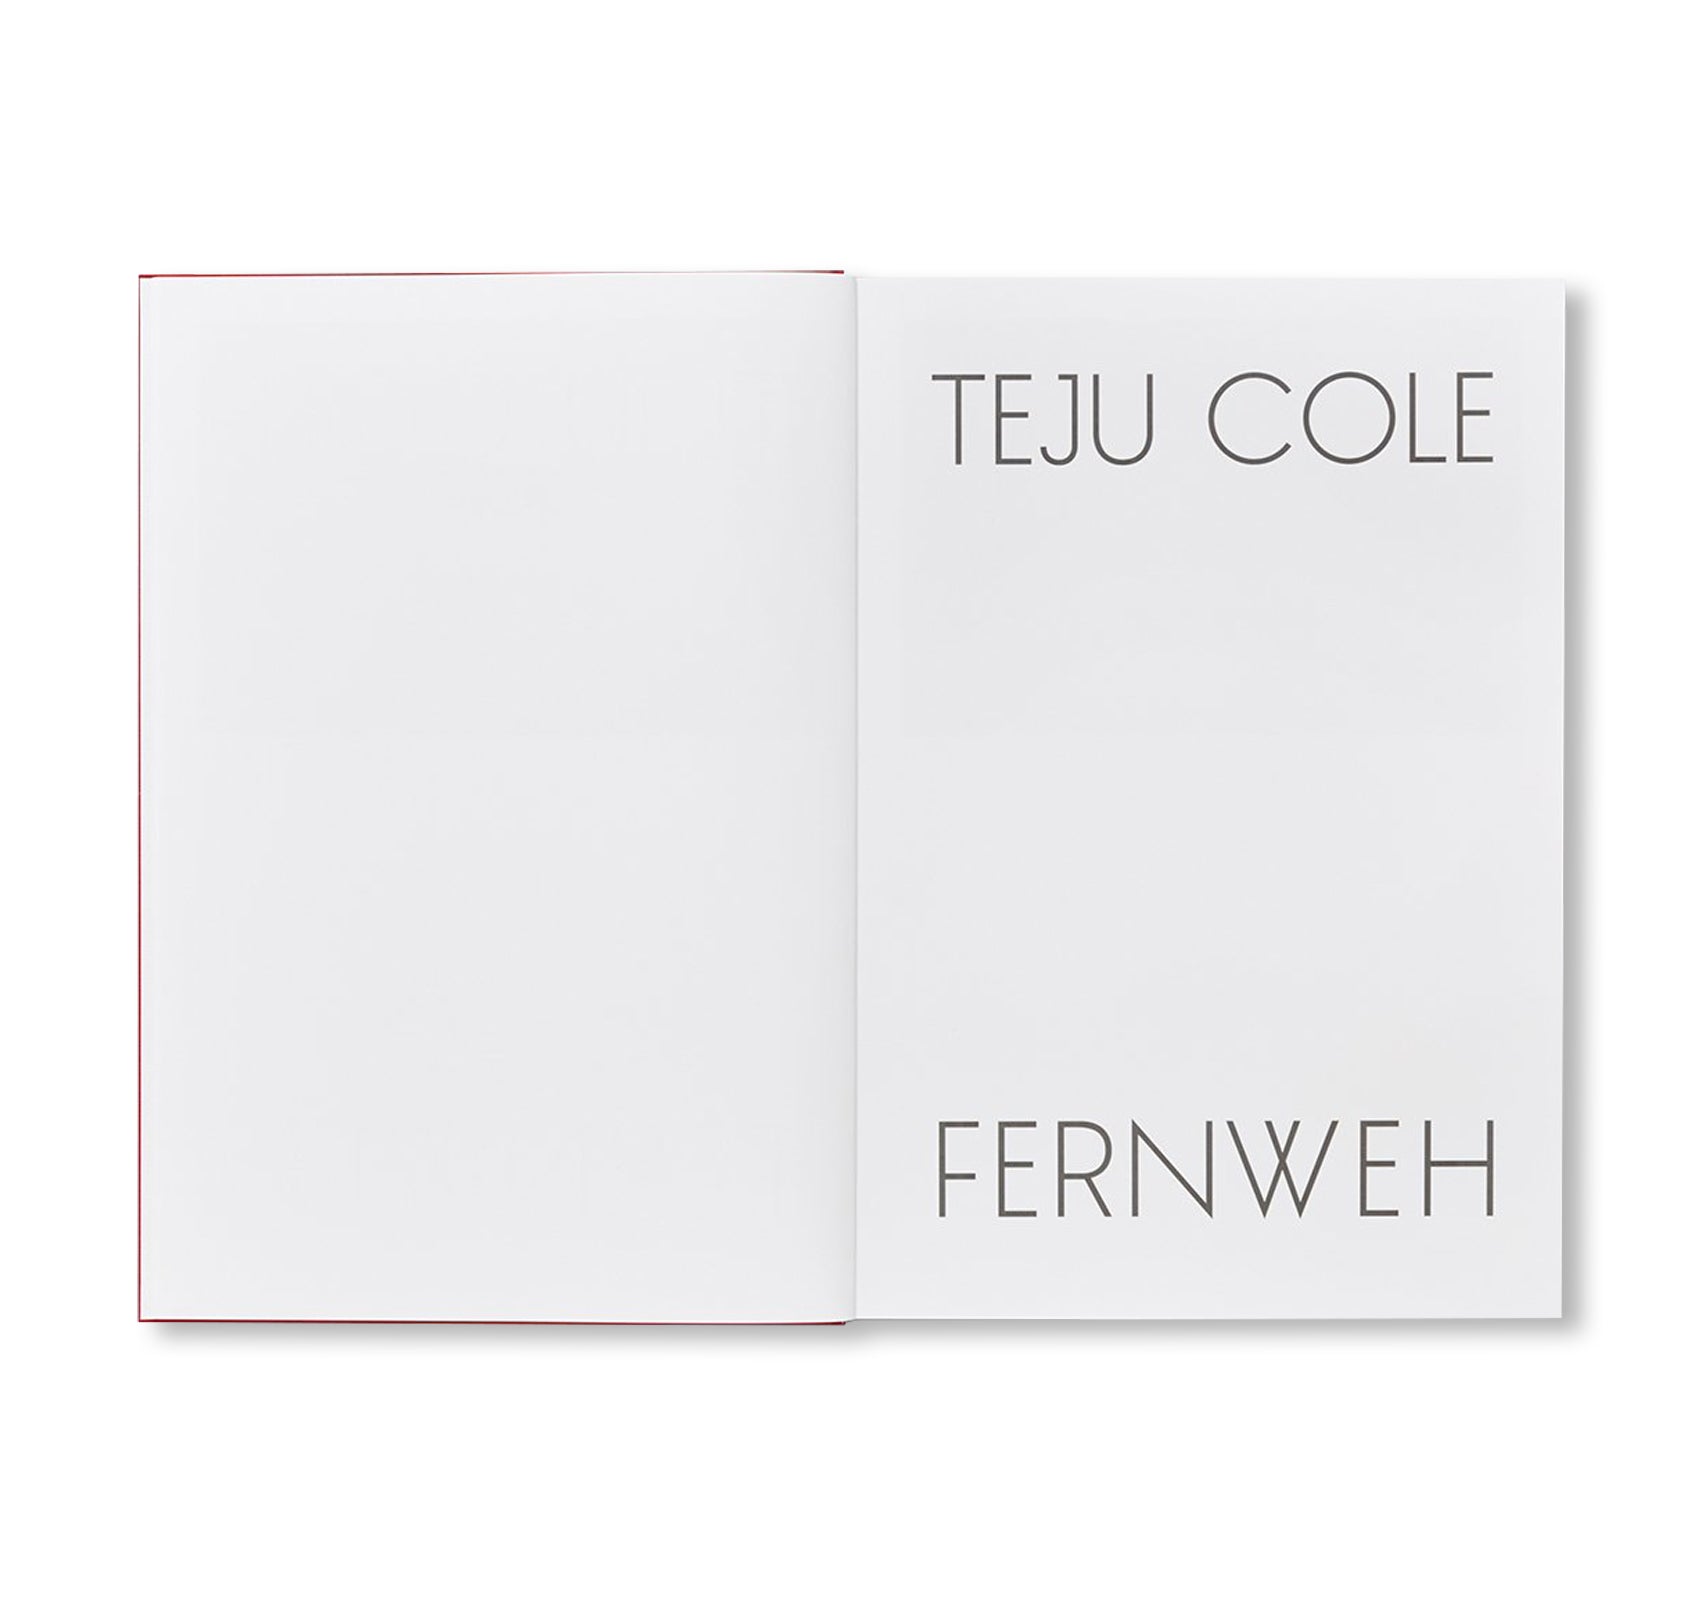 FERNWEH by Teju Cole [SIGNED]